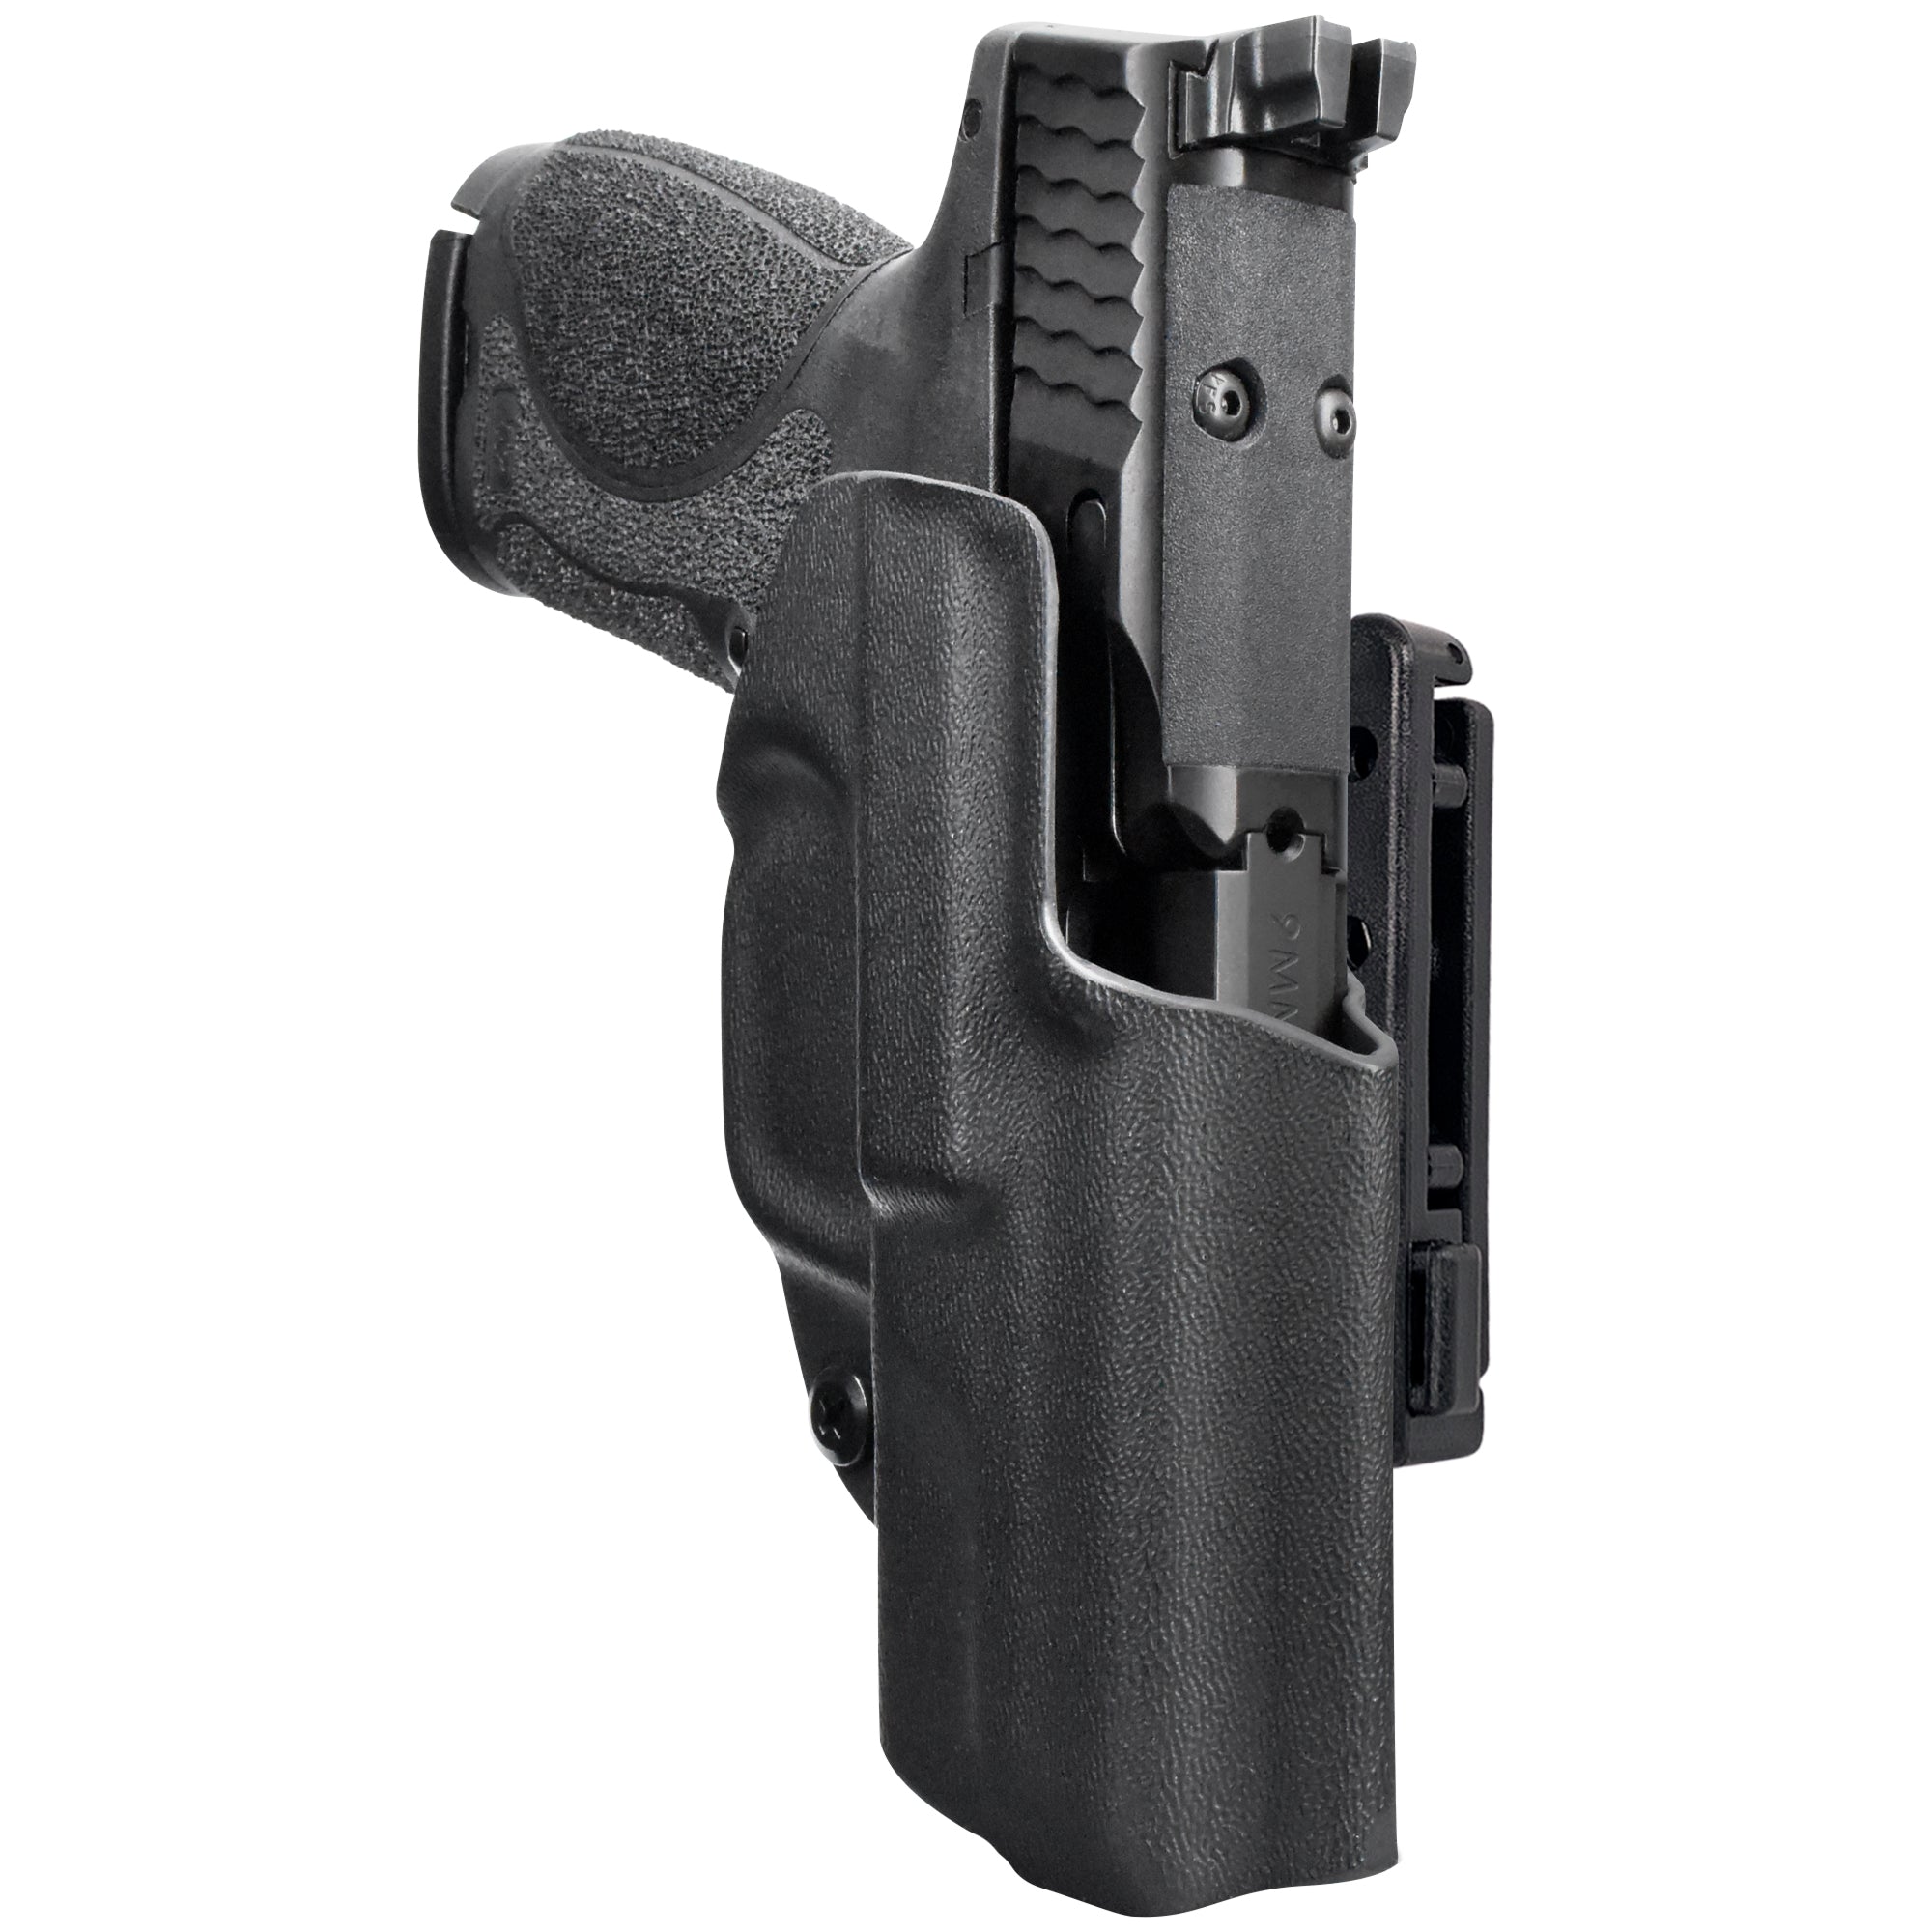 Smith & Wesson M&P9 Subcompact Pro IDPA Competition Holster in Black